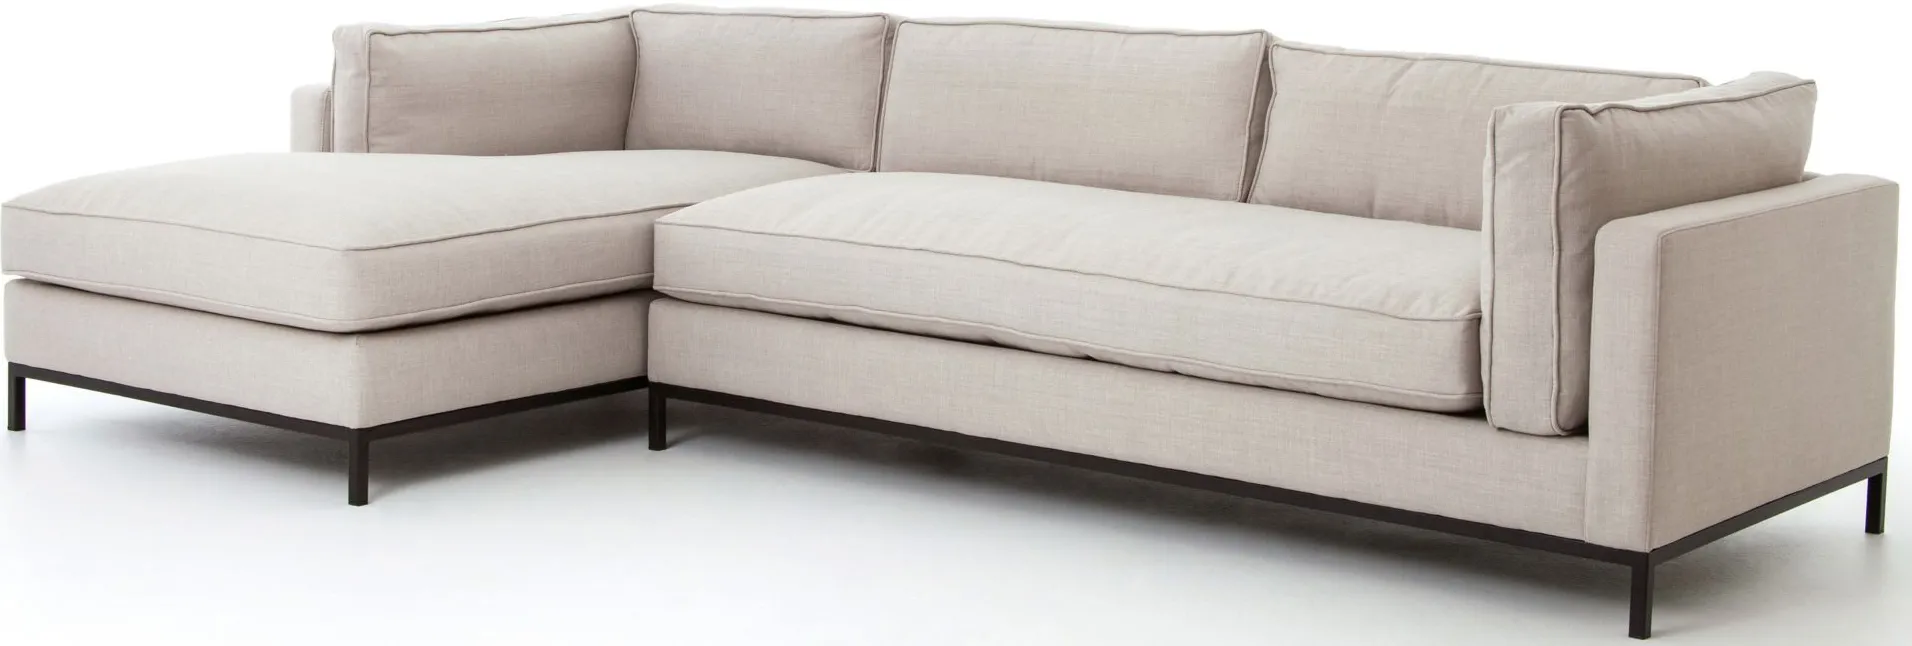 DuPar 2-pc. Sectional Sofa w/ Chaise in Bennett Moon by Four Hands